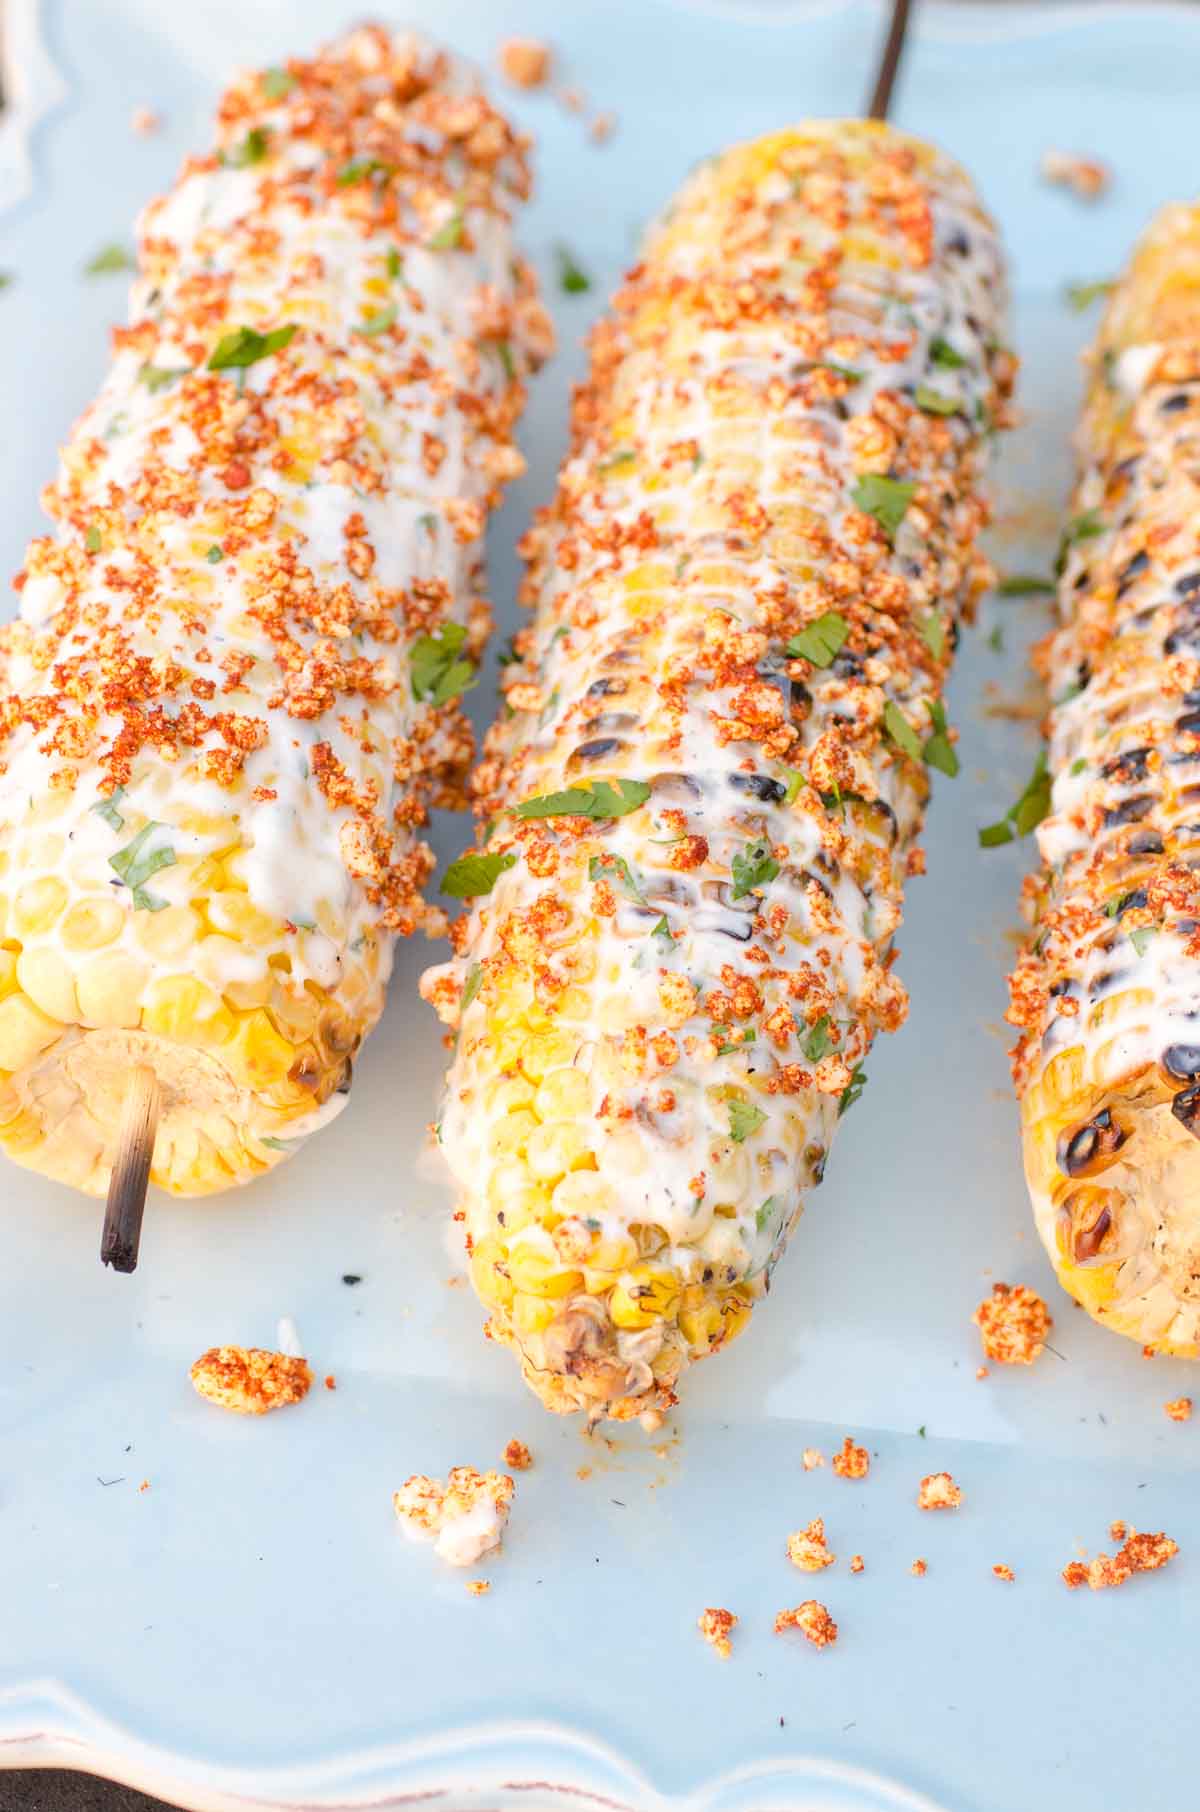 corn on cob on skewers with creamy dressing on blue plate